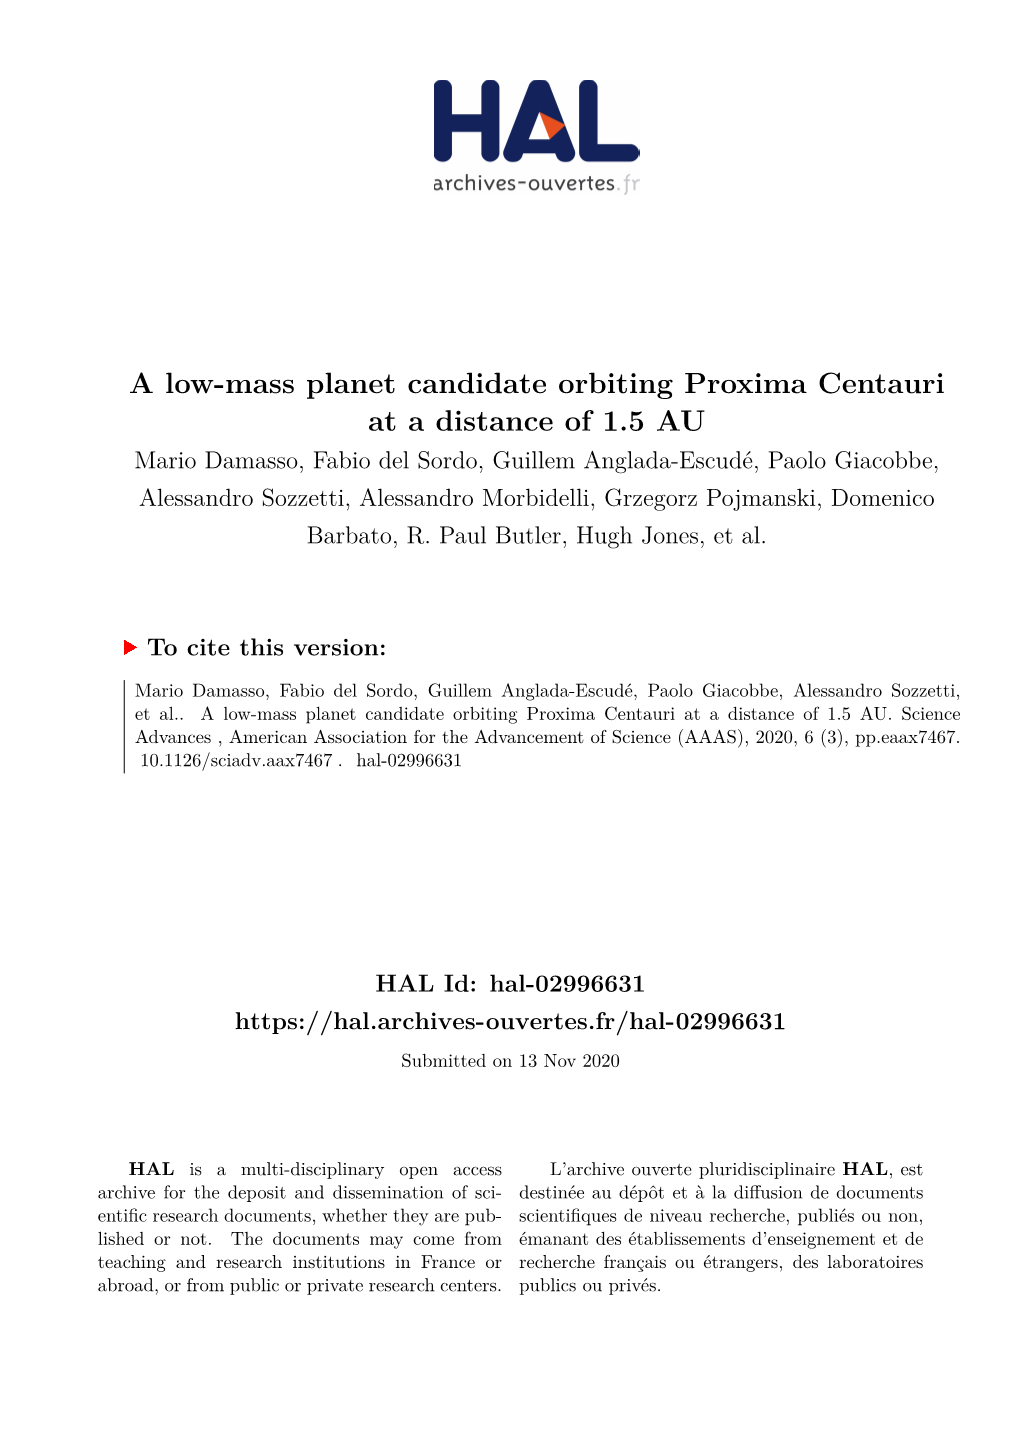 A Low-Mass Planet Candidate Orbiting Proxima Centauri at a Distance Of